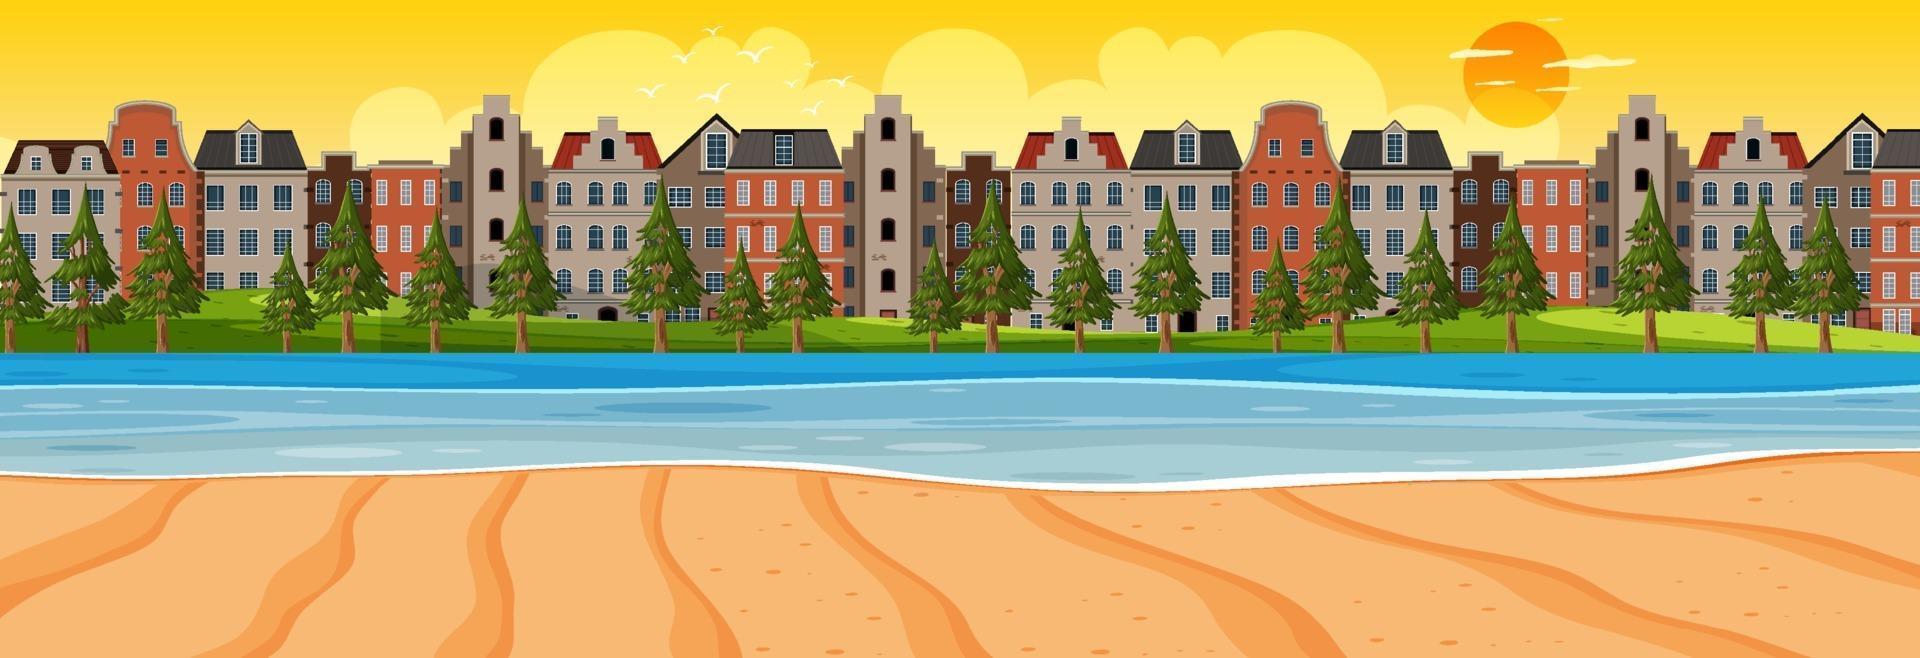 Beach horizontal scene at sunset time with city background vector